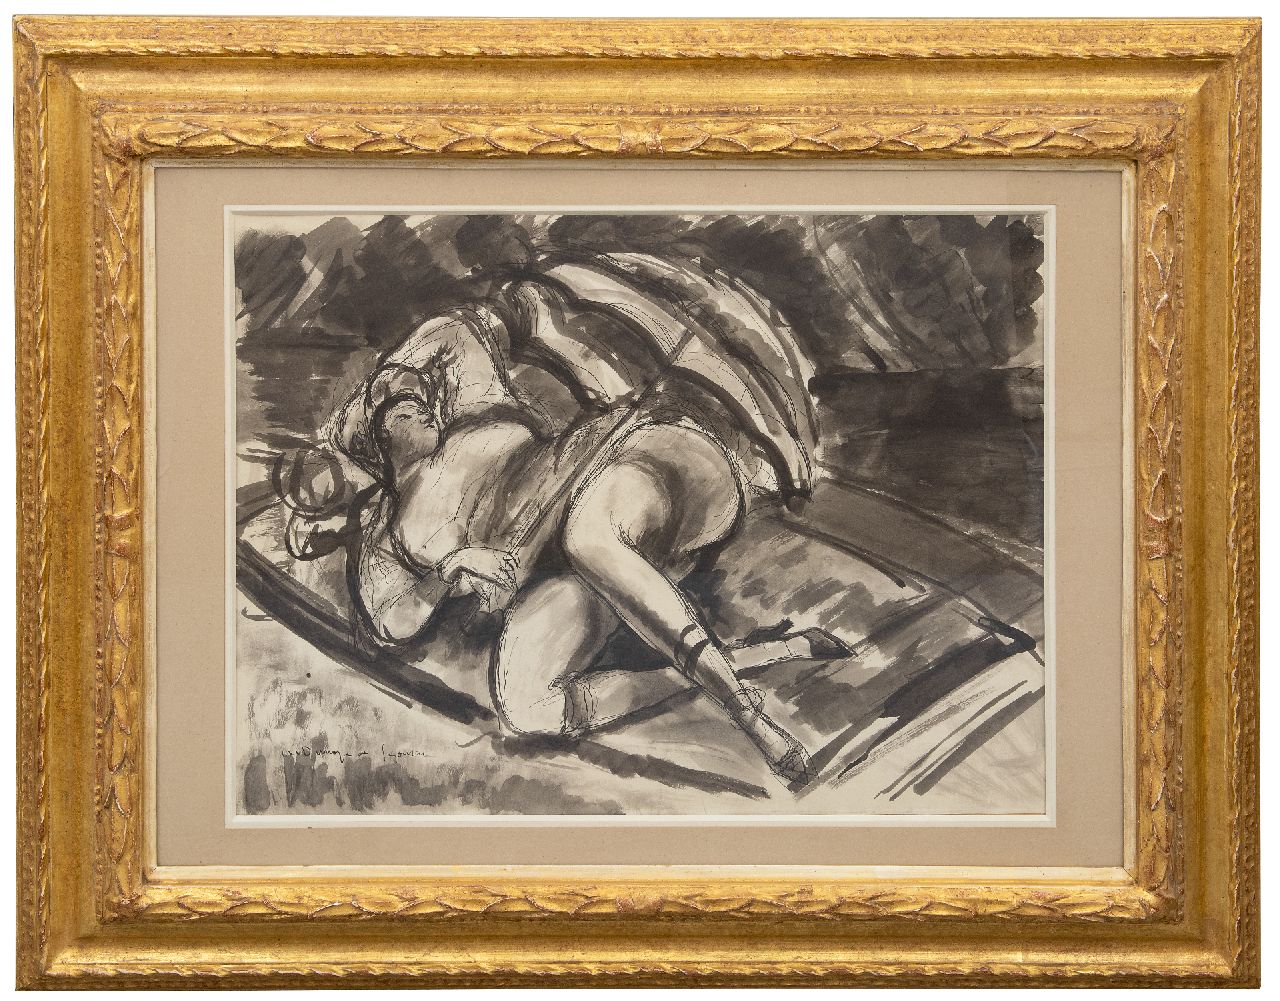 Dunoyer de Segonzac A.A.M.  | 'André' Albert Marie Dunoyer de Segonzac | Watercolours and drawings offered for sale | Jeune femme nue allongée (a study for Les Canotiers), ink and chalk on paper 47.6 x 62.5 cm, signed l.l. and executed ca. 1924